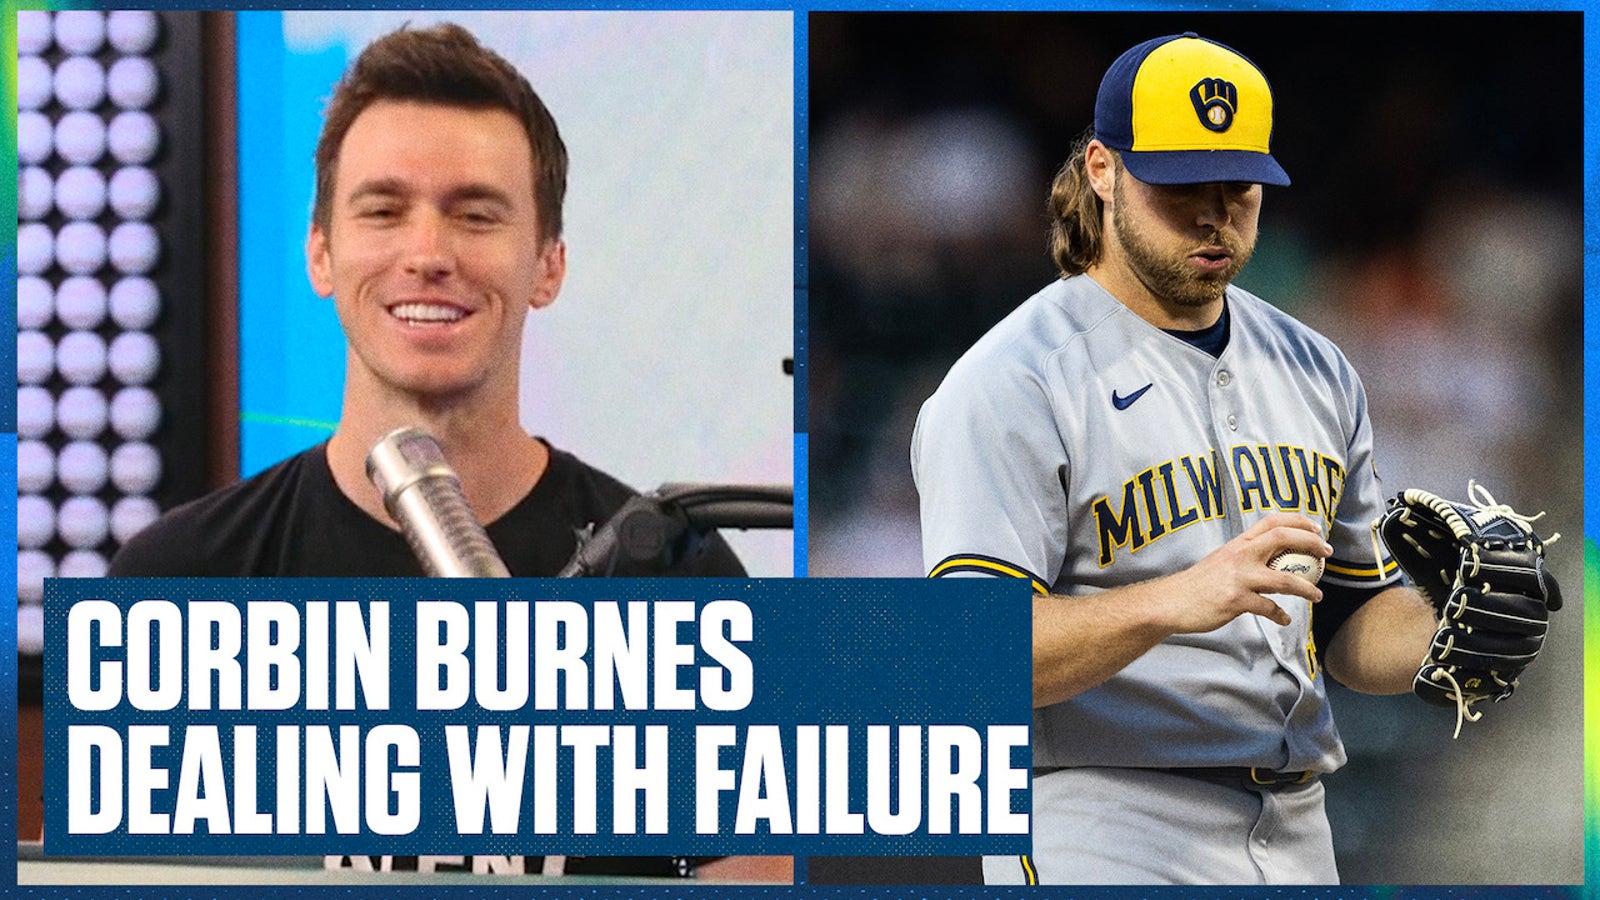 Corbin Burnes on how a mental performance coach changed his career